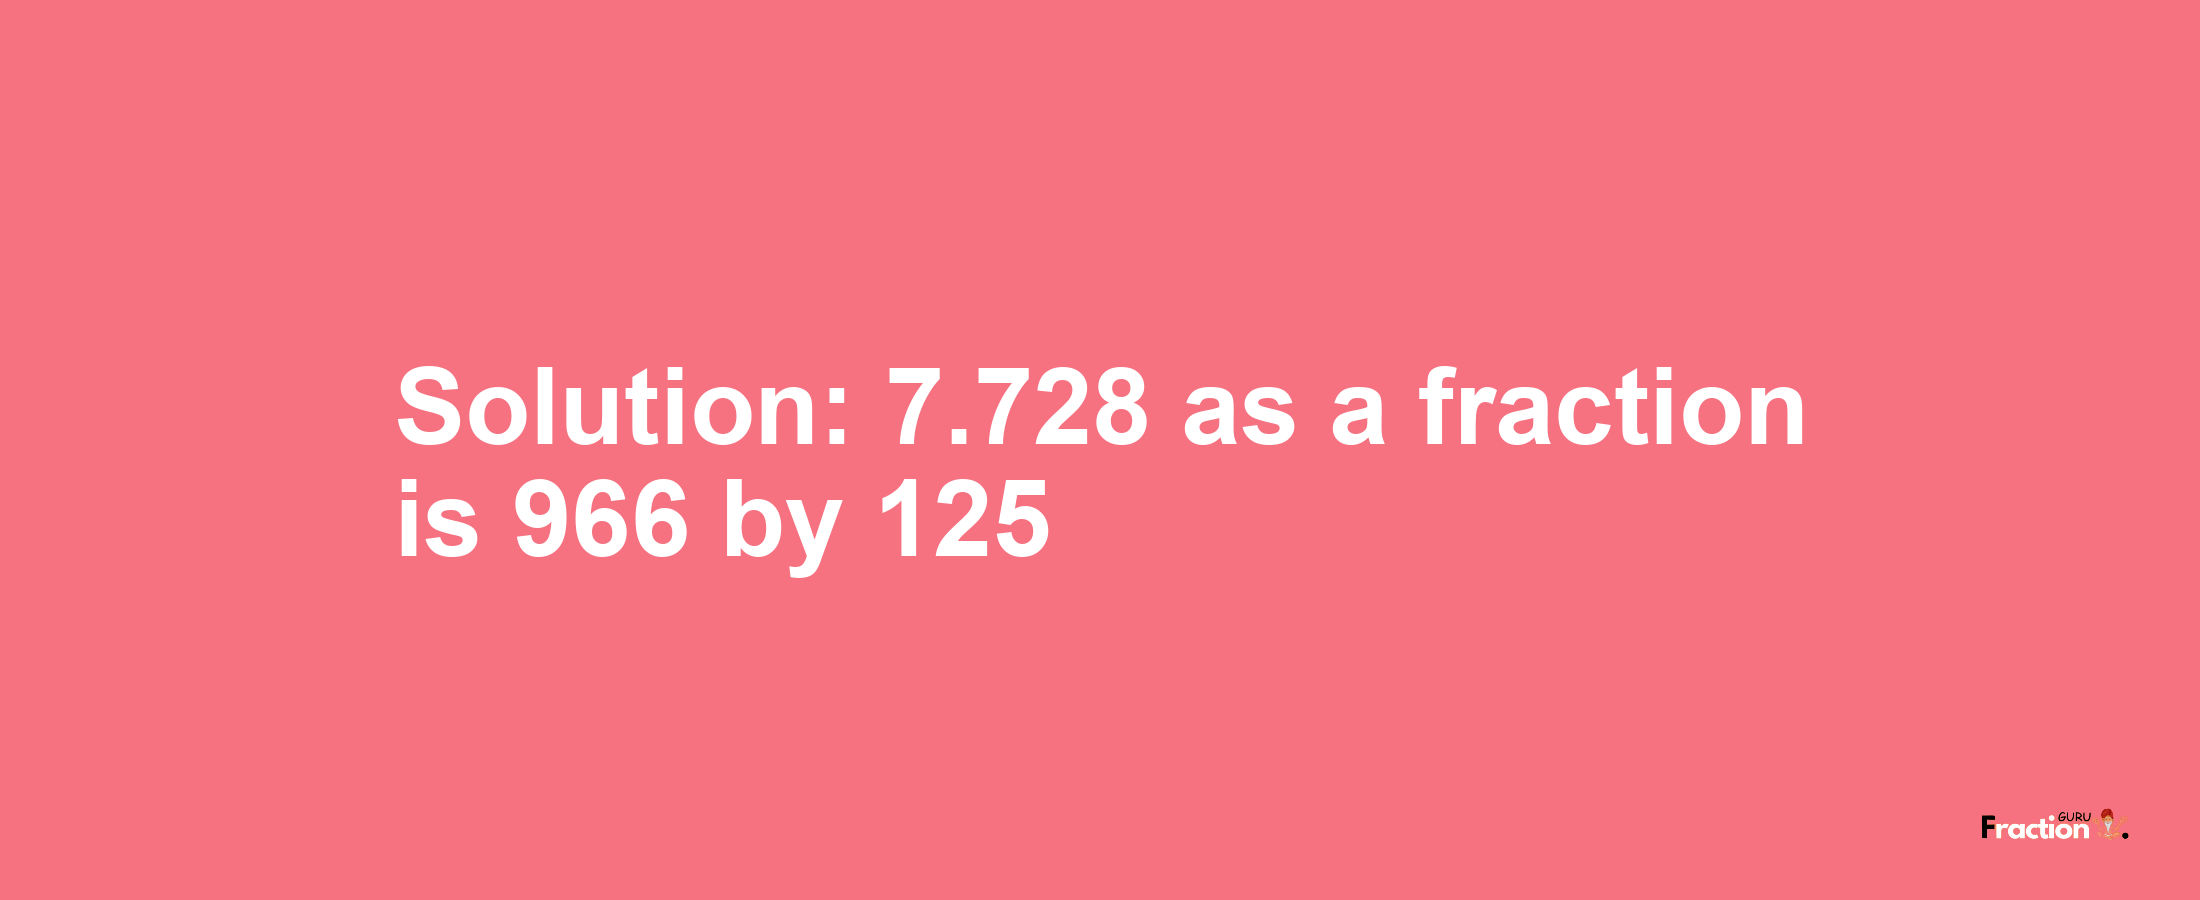 Solution:7.728 as a fraction is 966/125